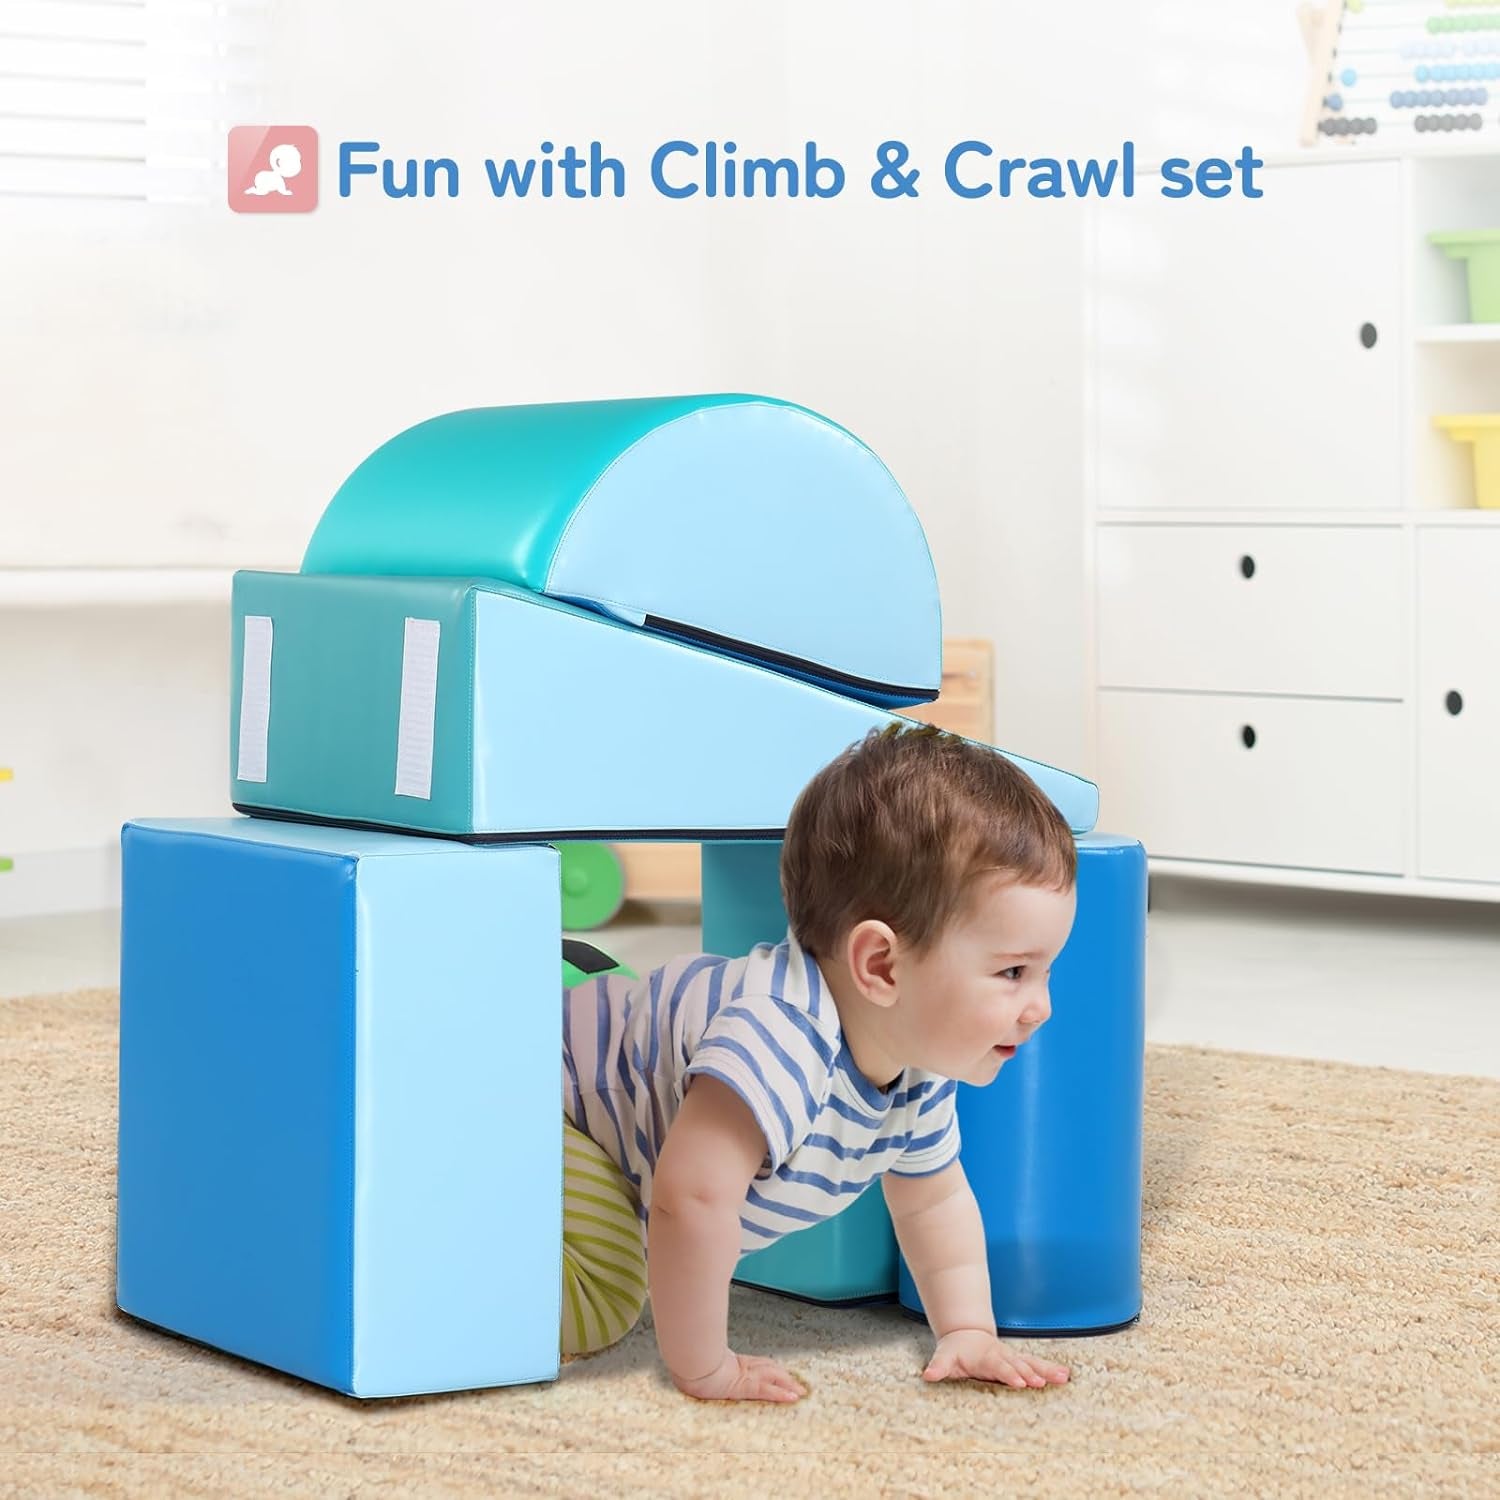 Soft Foam Climbing Blocks 5-Pieces Set, Crawl and Climb Foam Blocks, Beginner Toddler Climber with Slide & Ramp, Indoor Active Play Structures for Babies and Toddlers Age 1-3